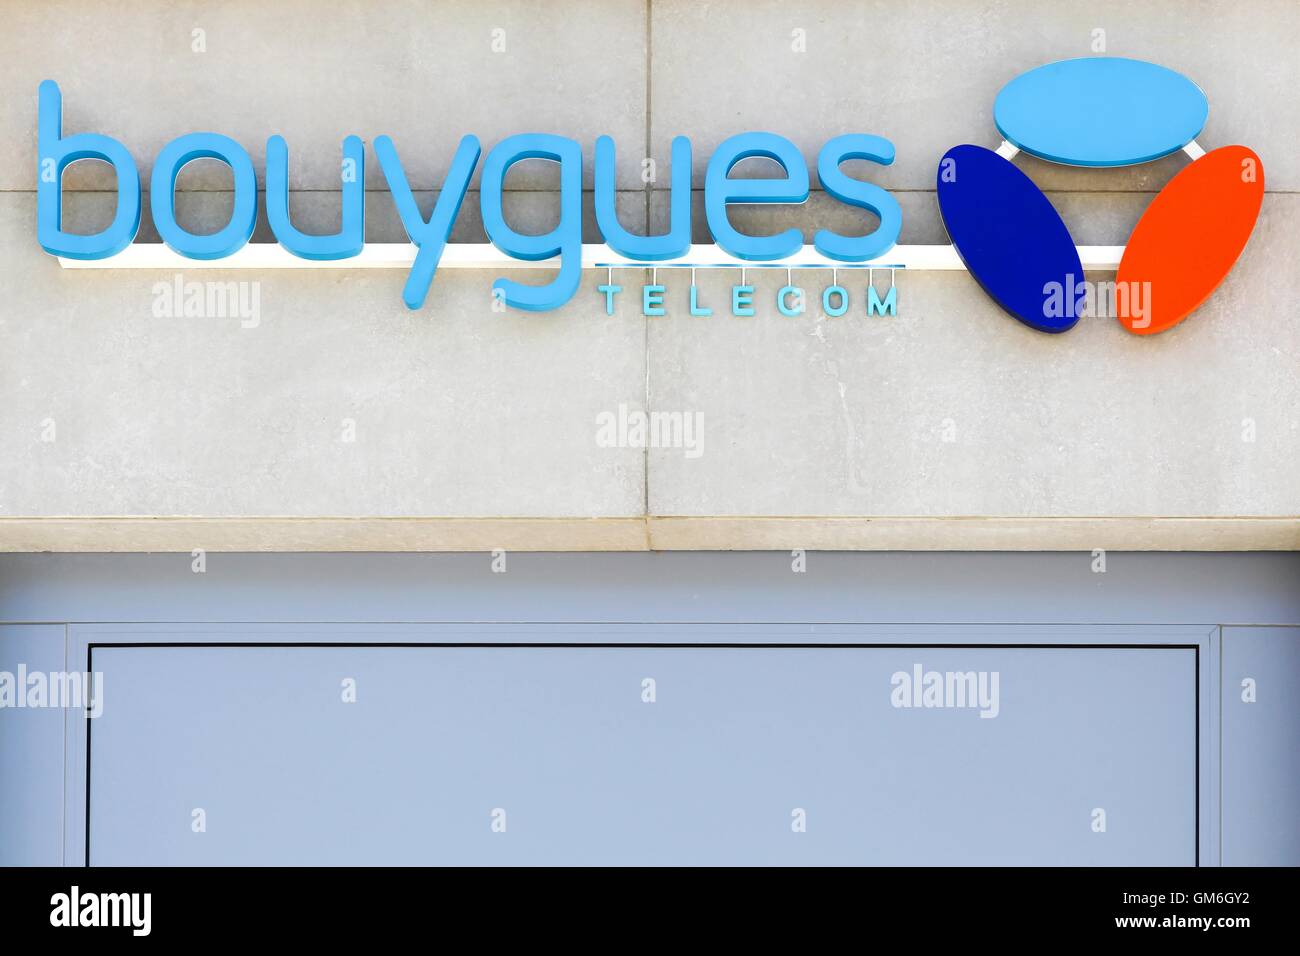 Bouygues Telecom logo on wall of a store Stock Photo